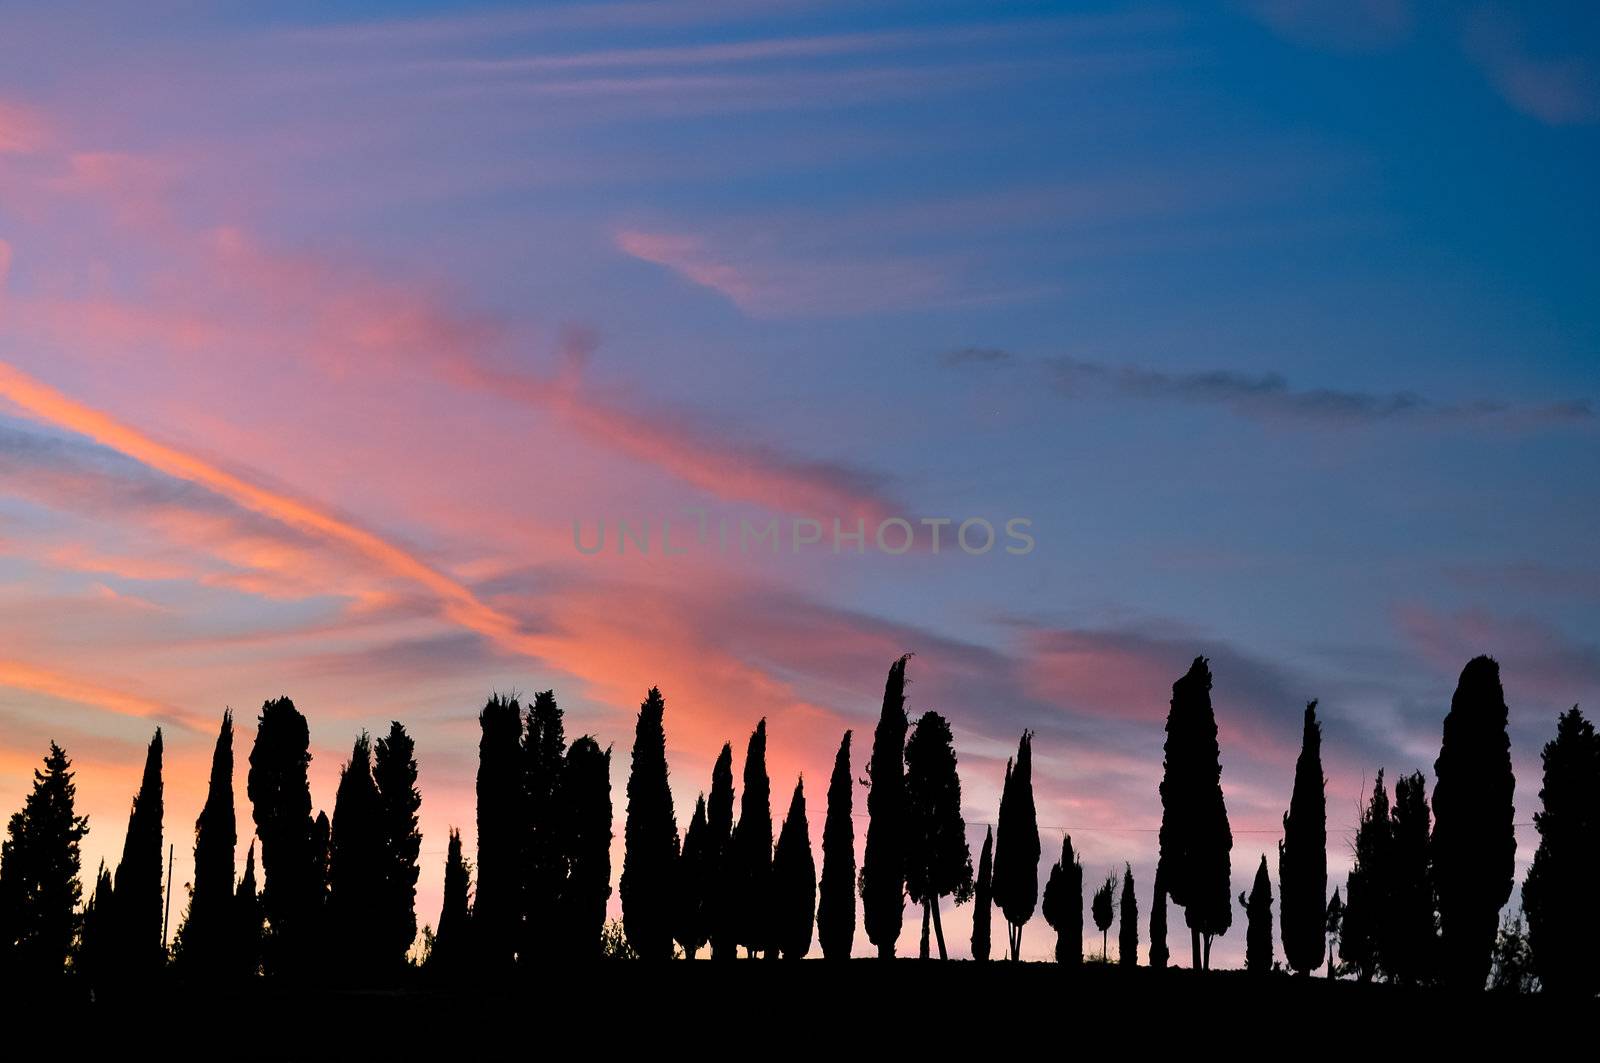 Tuscan trees silhouettes at sunset with purple and blue sky and clouds by martinm303